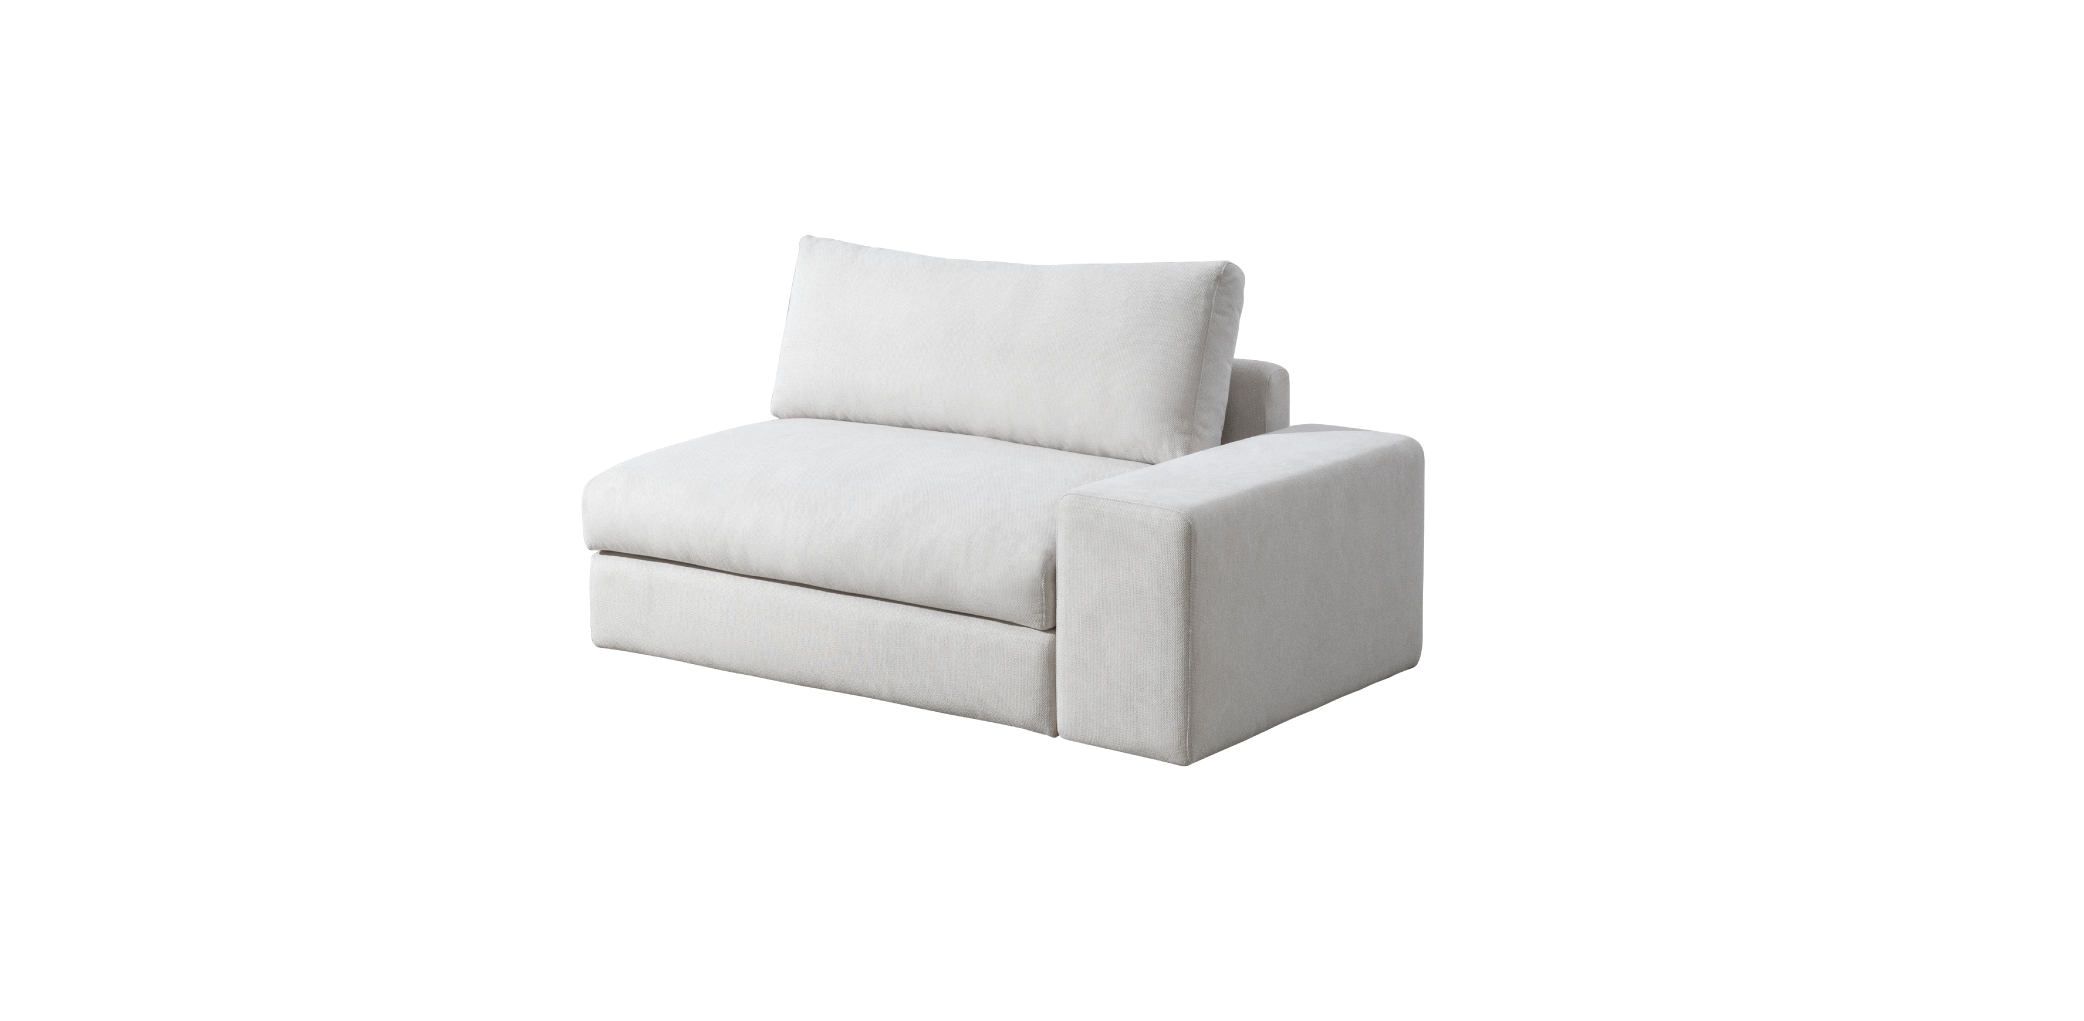 https://zerofurniture.vn/static/2982/2023/12/11/product_classic_1 seater_nsp.png